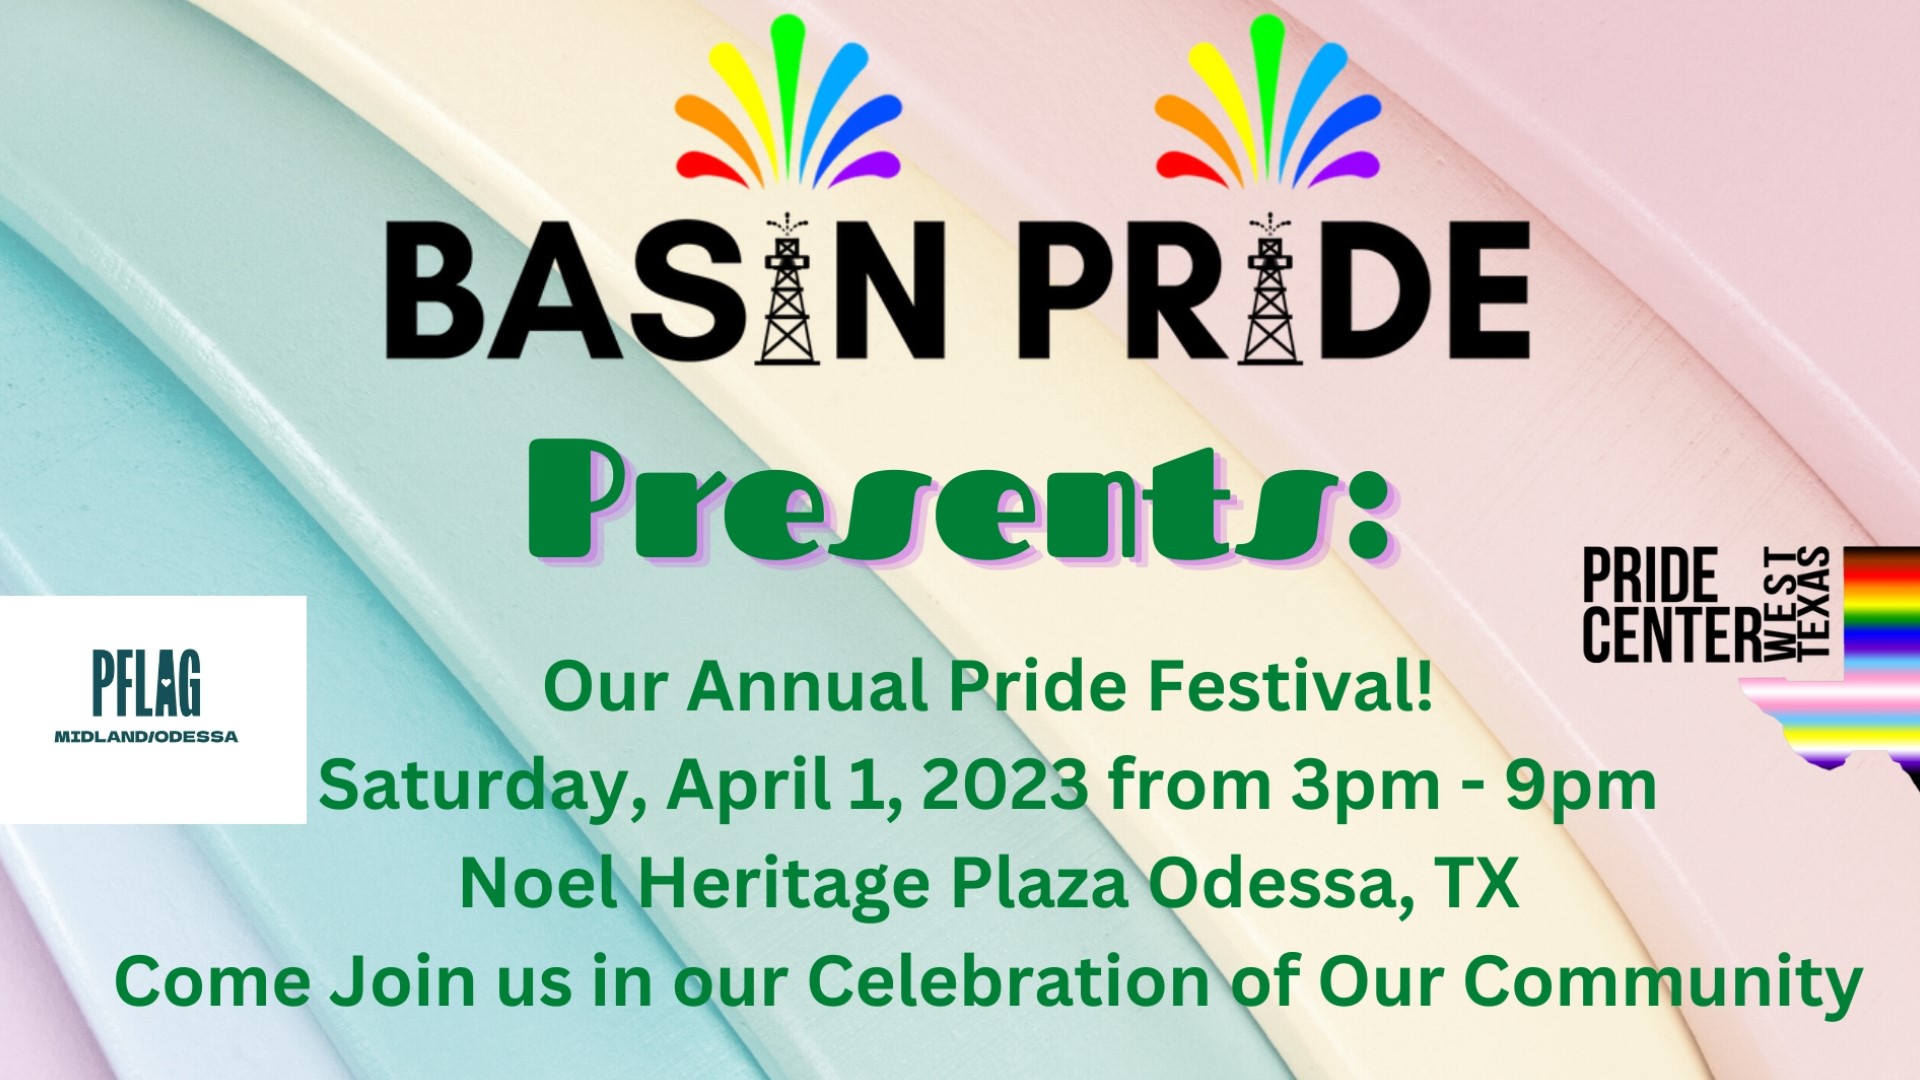 The festival will take place at the Noel Heritage Plaza in Odessa from 3:00 p.m. to 9:00 p.m.